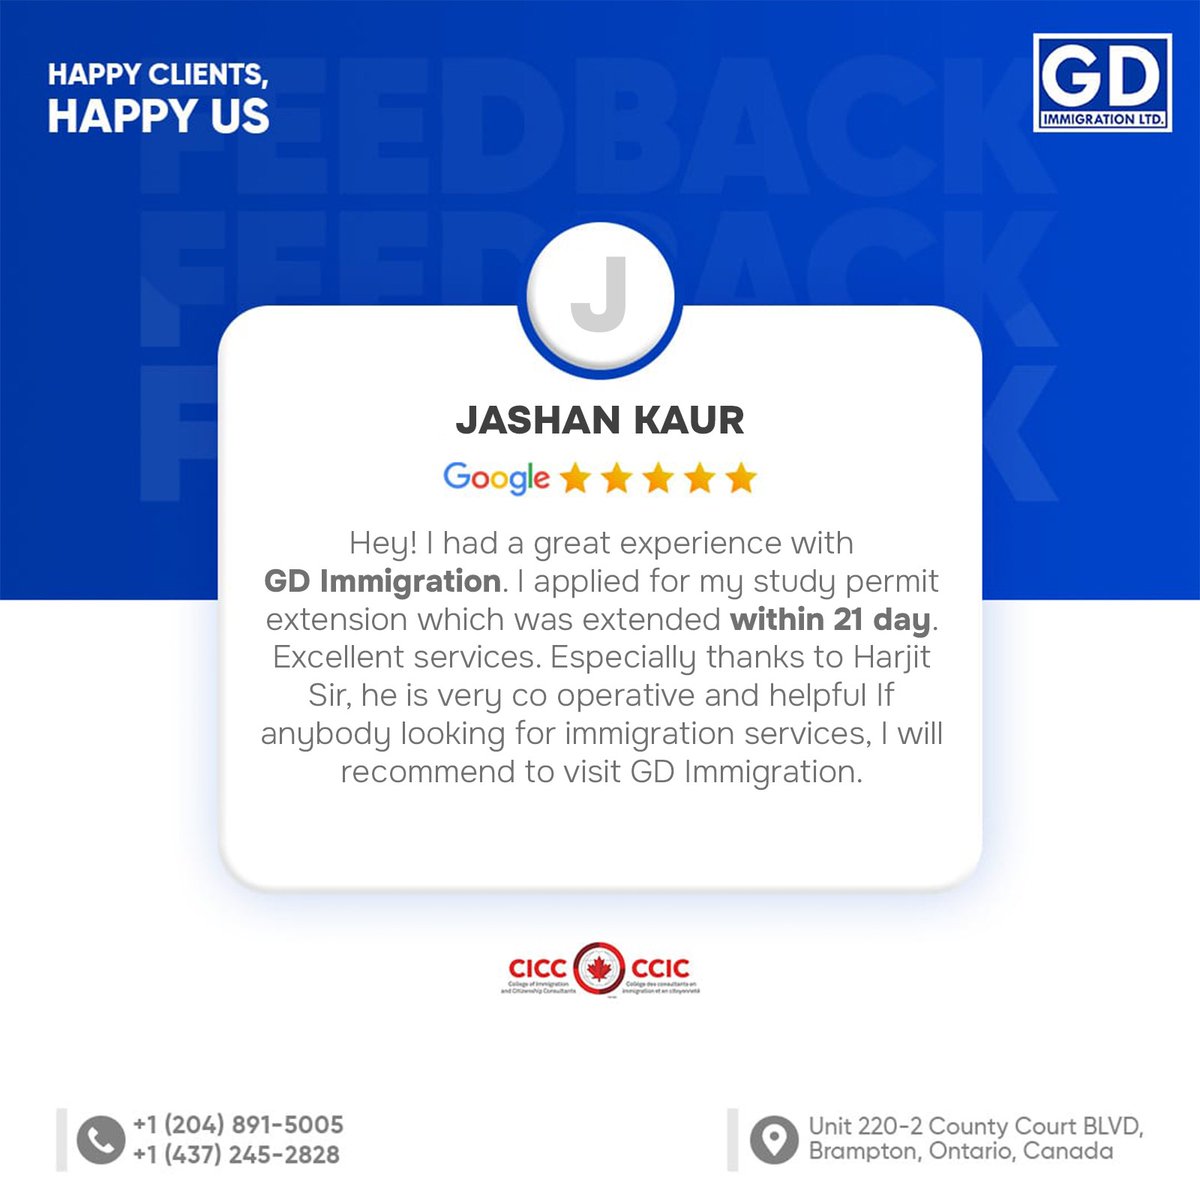 🎓 Thrilled to receive another glowing review from a satisfied client! 🎉 Jashan Kaur's study permit extension was seamlessly processed within 21 days! 🌟 

#GDImmigration #Canada #GoogleReview #CanadaSuperVisa #Visa  #VisaApproval #ImmigrationConsultants #brampton #SuccessStory